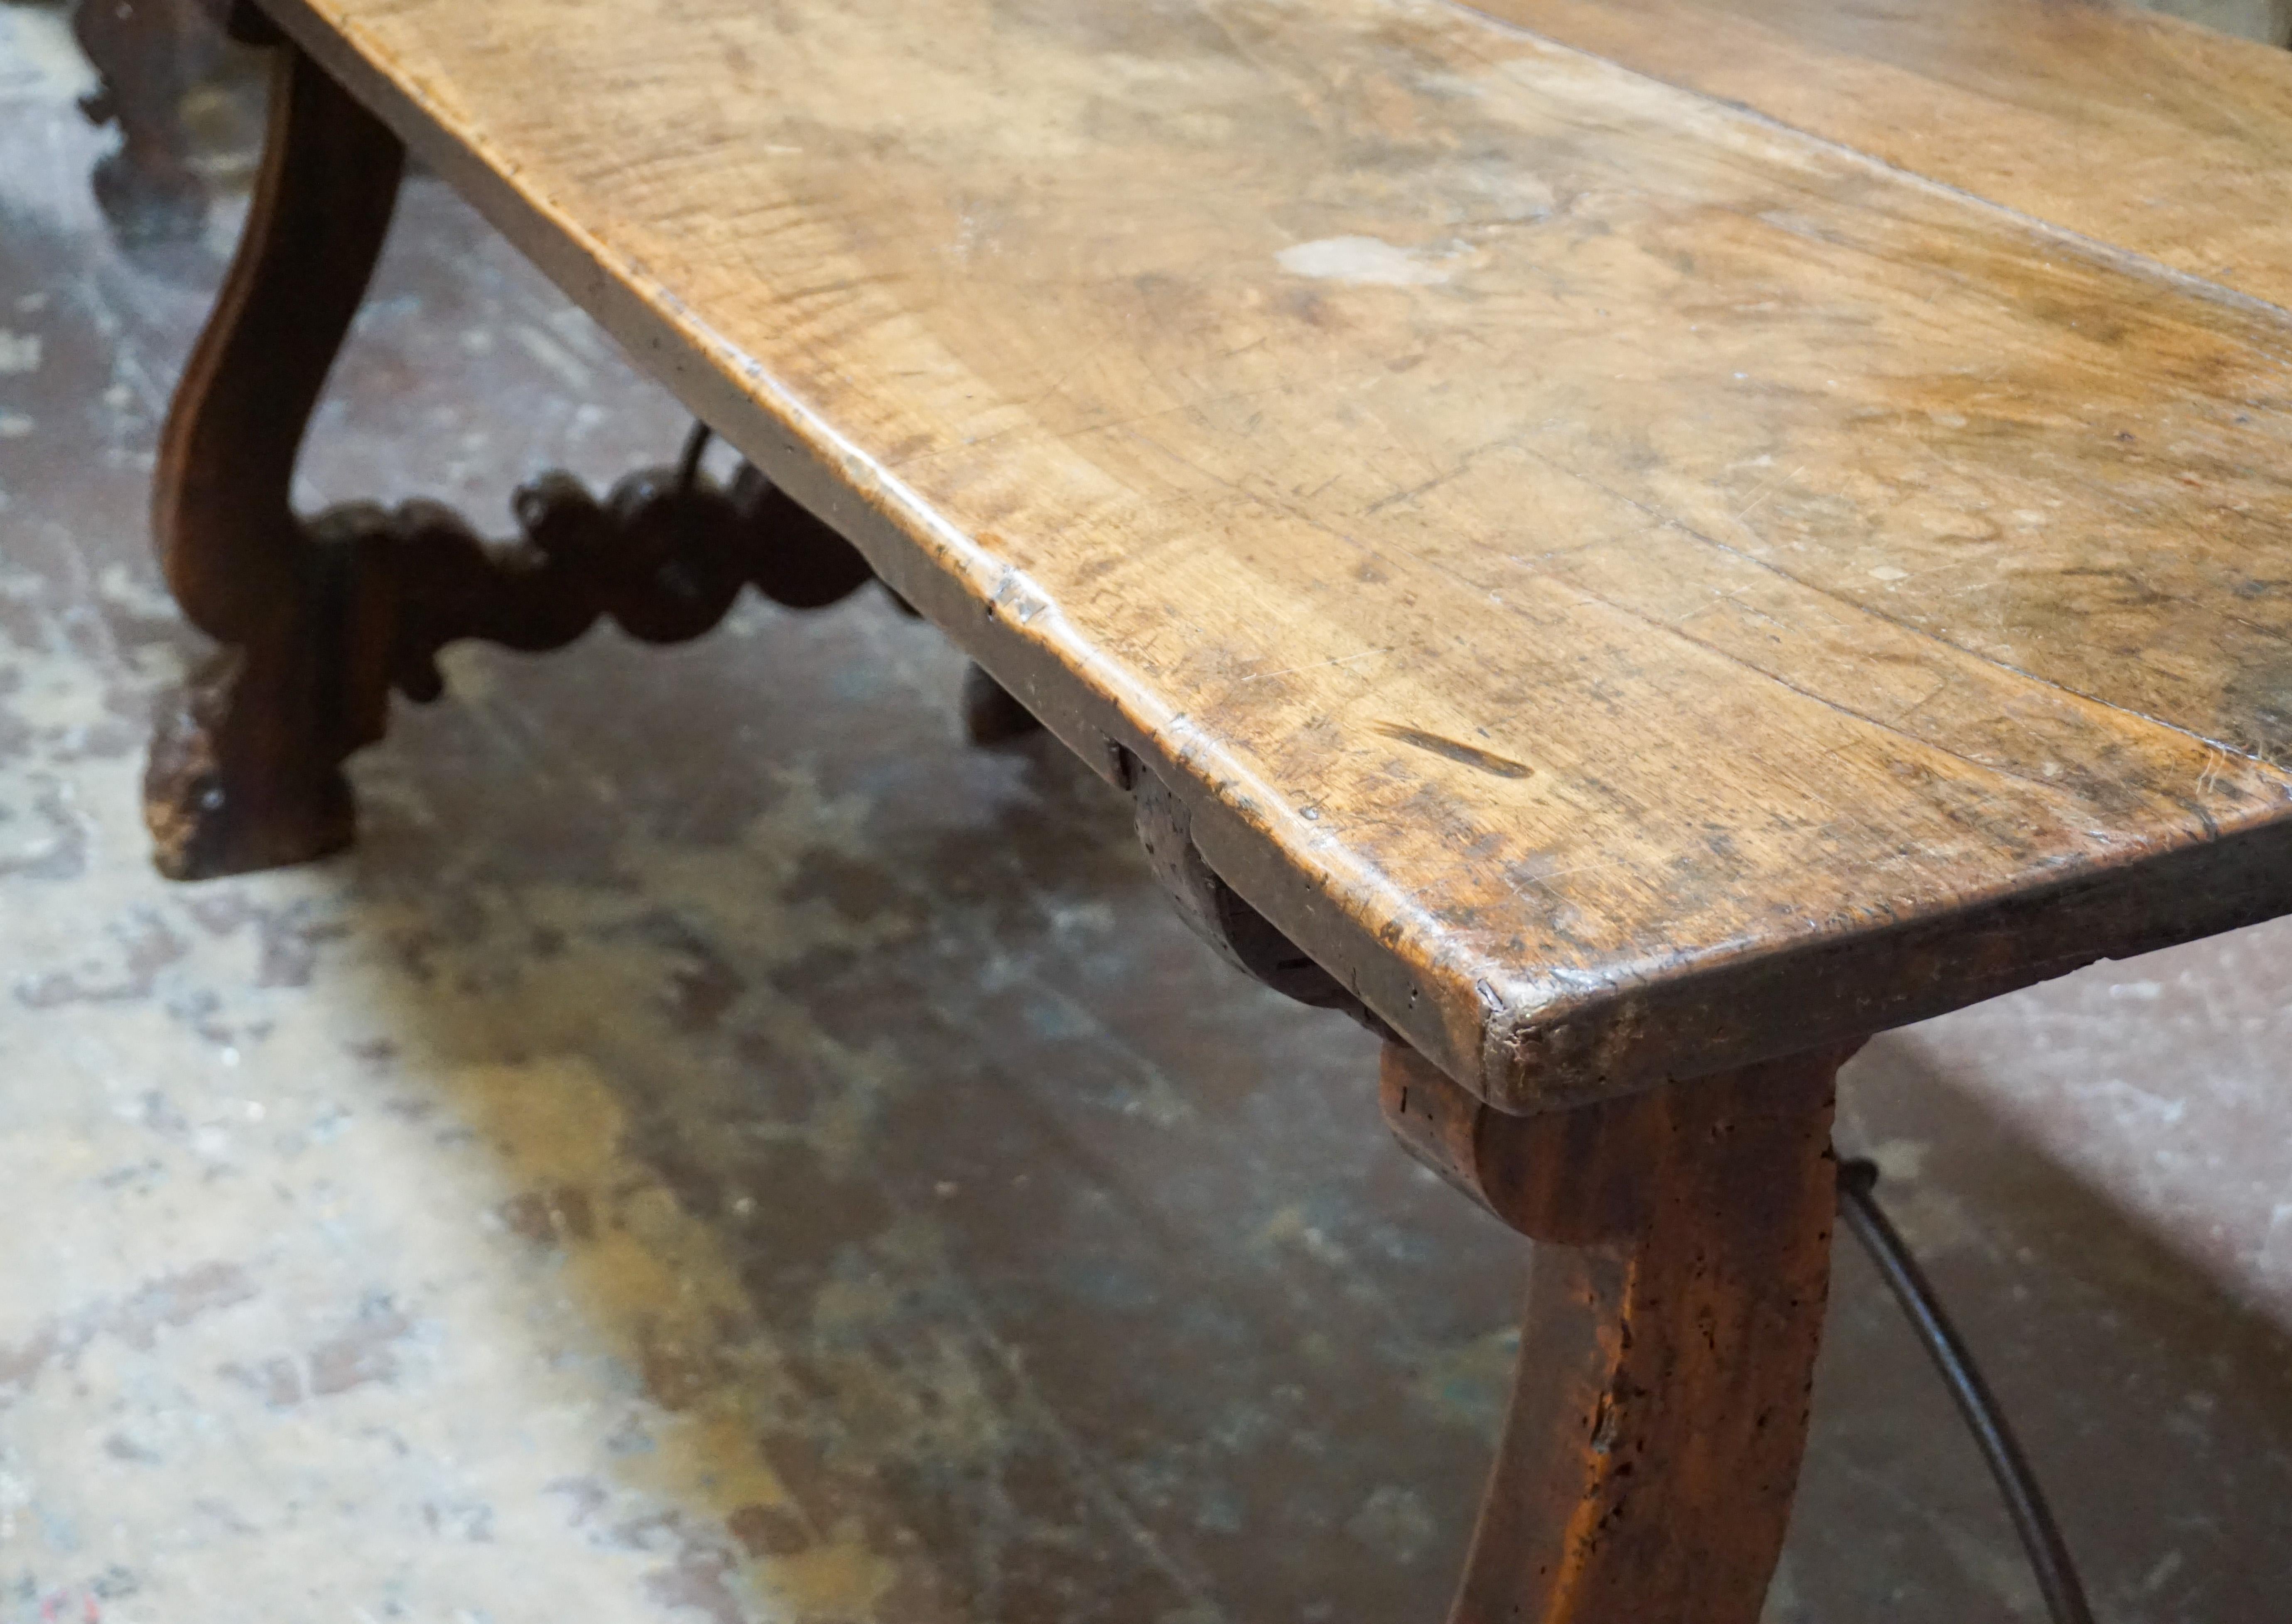 A beautiful dining table from Spain circa 1750. Made of walnut wood.

Measurements: 30.75'' D x 76.25'' W x 32'' H.